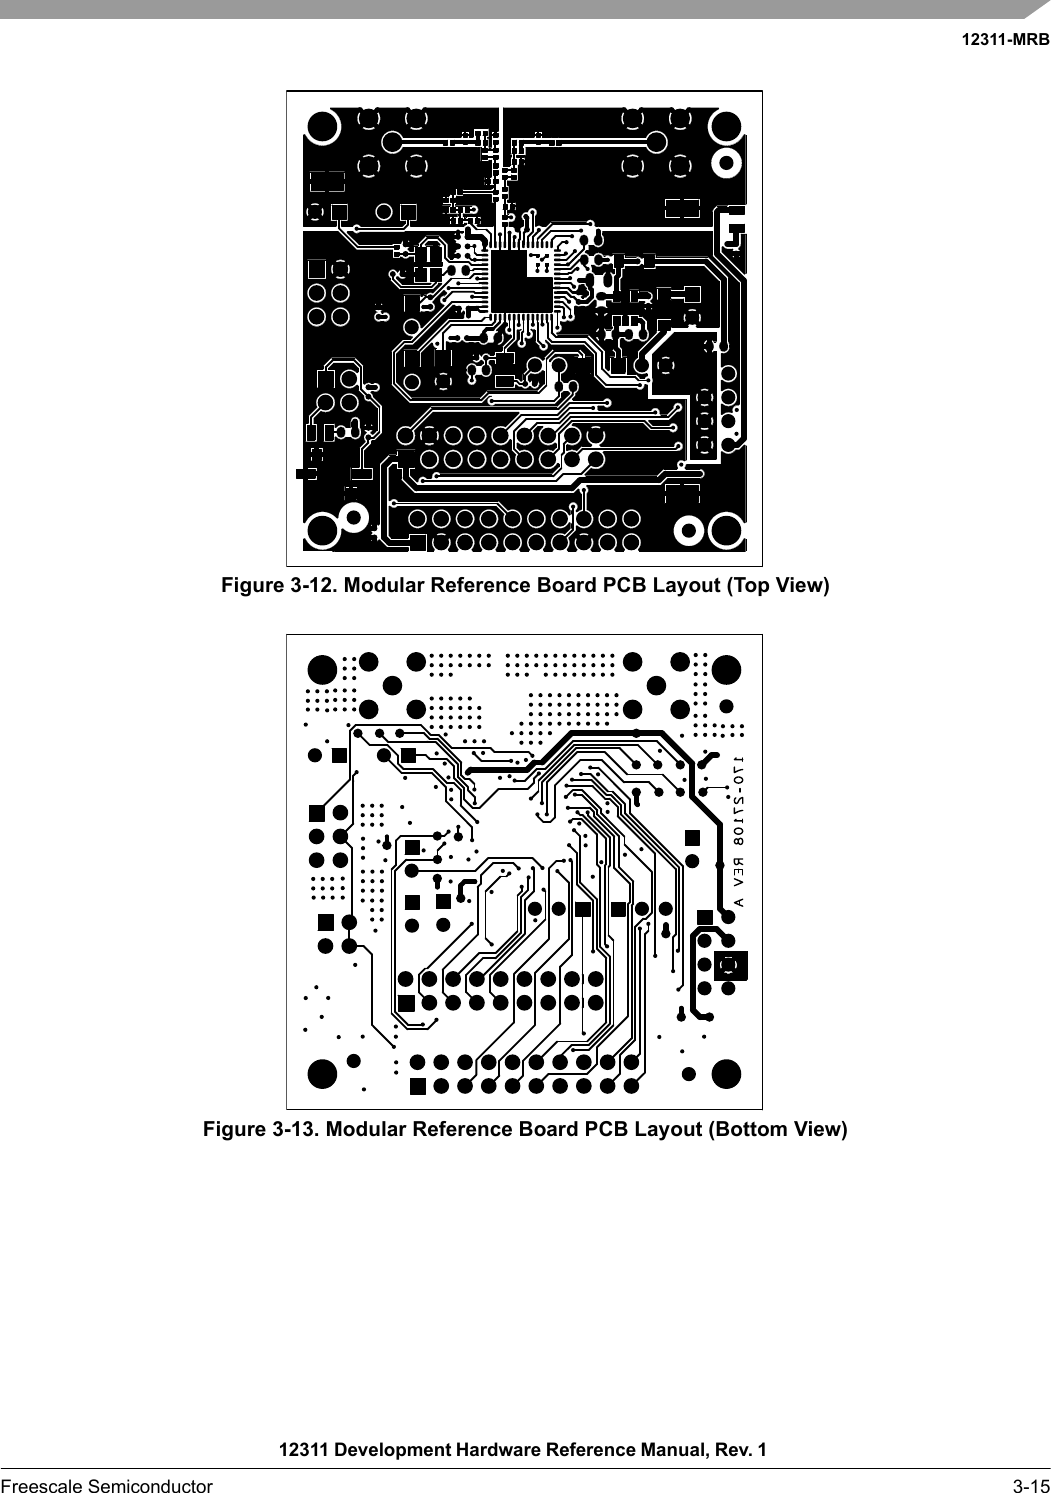 12311-MRB12311 Development Hardware Reference Manual, Rev. 1 Freescale Semiconductor 3-15Figure 3-12. Modular Reference Board PCB Layout (Top View)Figure 3-13. Modular Reference Board PCB Layout (Bottom View)